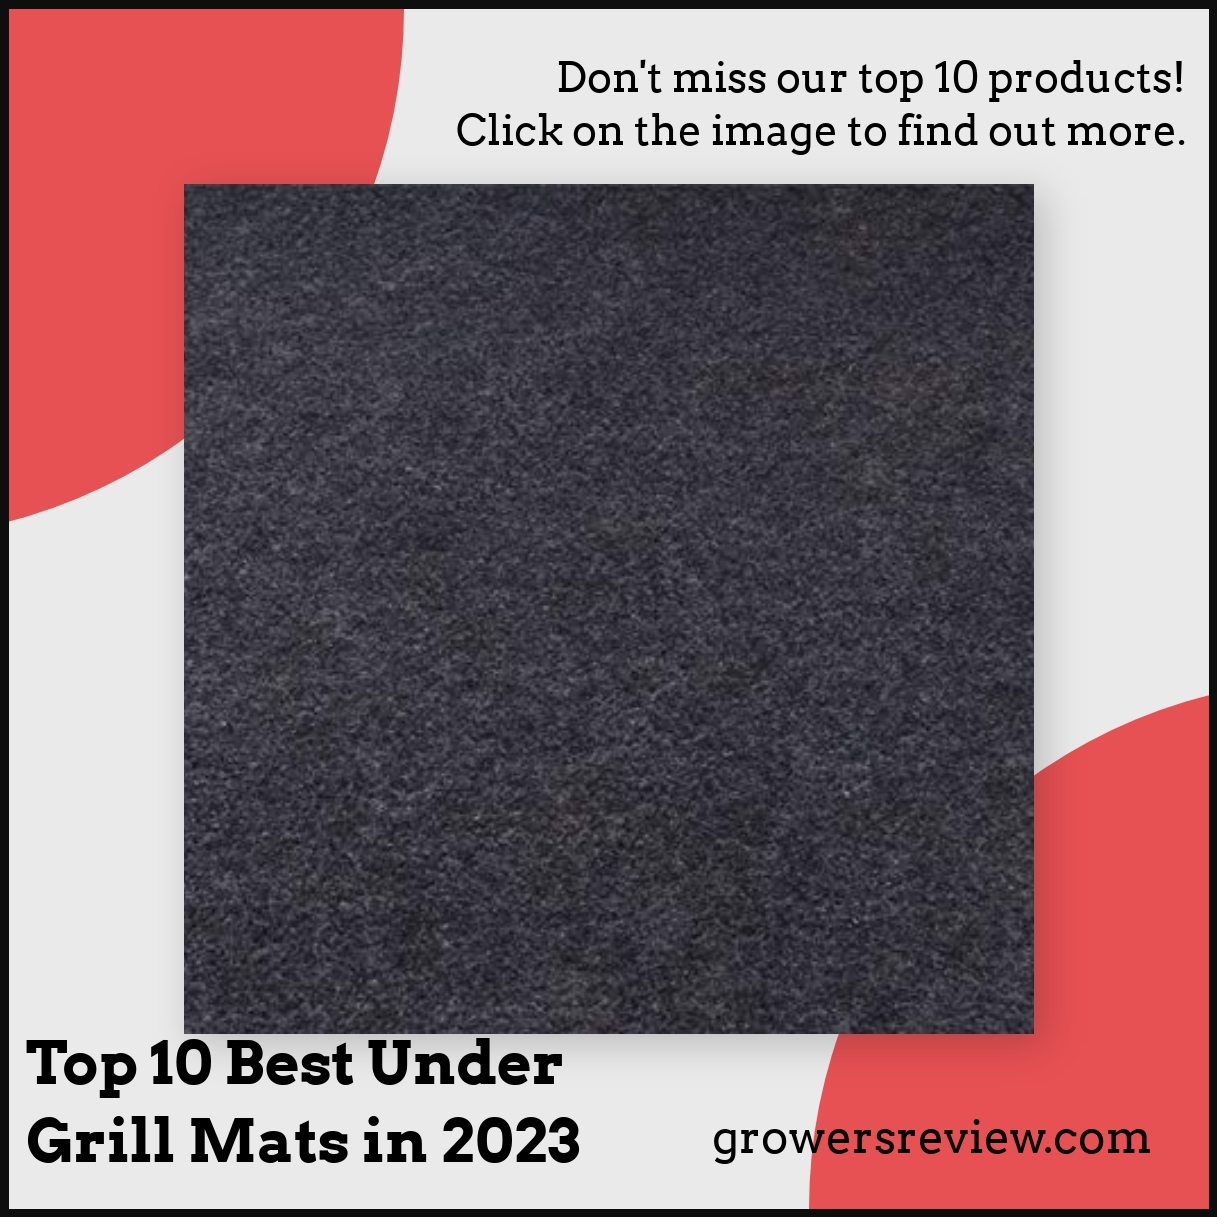 Top 10 Best Under Grill Mats in 2023